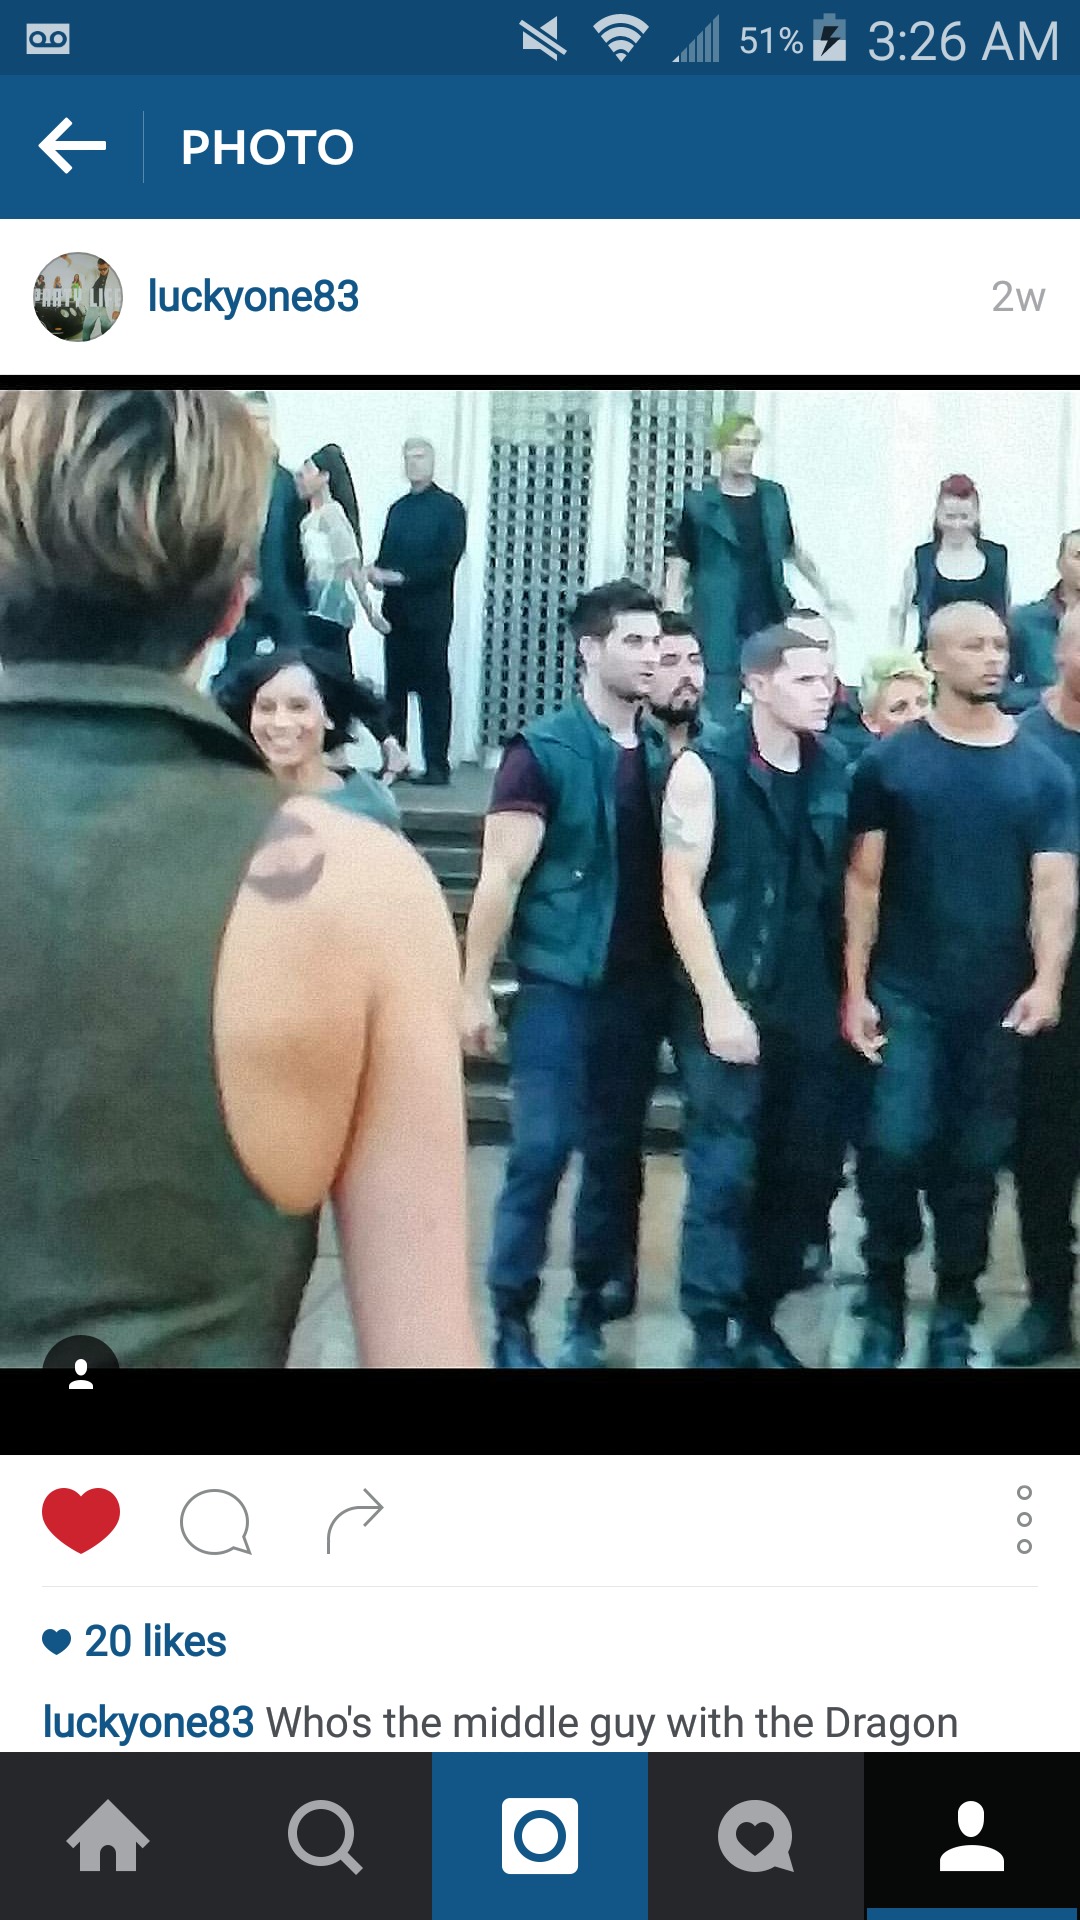 INSURGENT FEATURE FILM ME AS A DAUNTLESS REBEL IN THE MIDDLE WITH DRAGON TATTOO !!